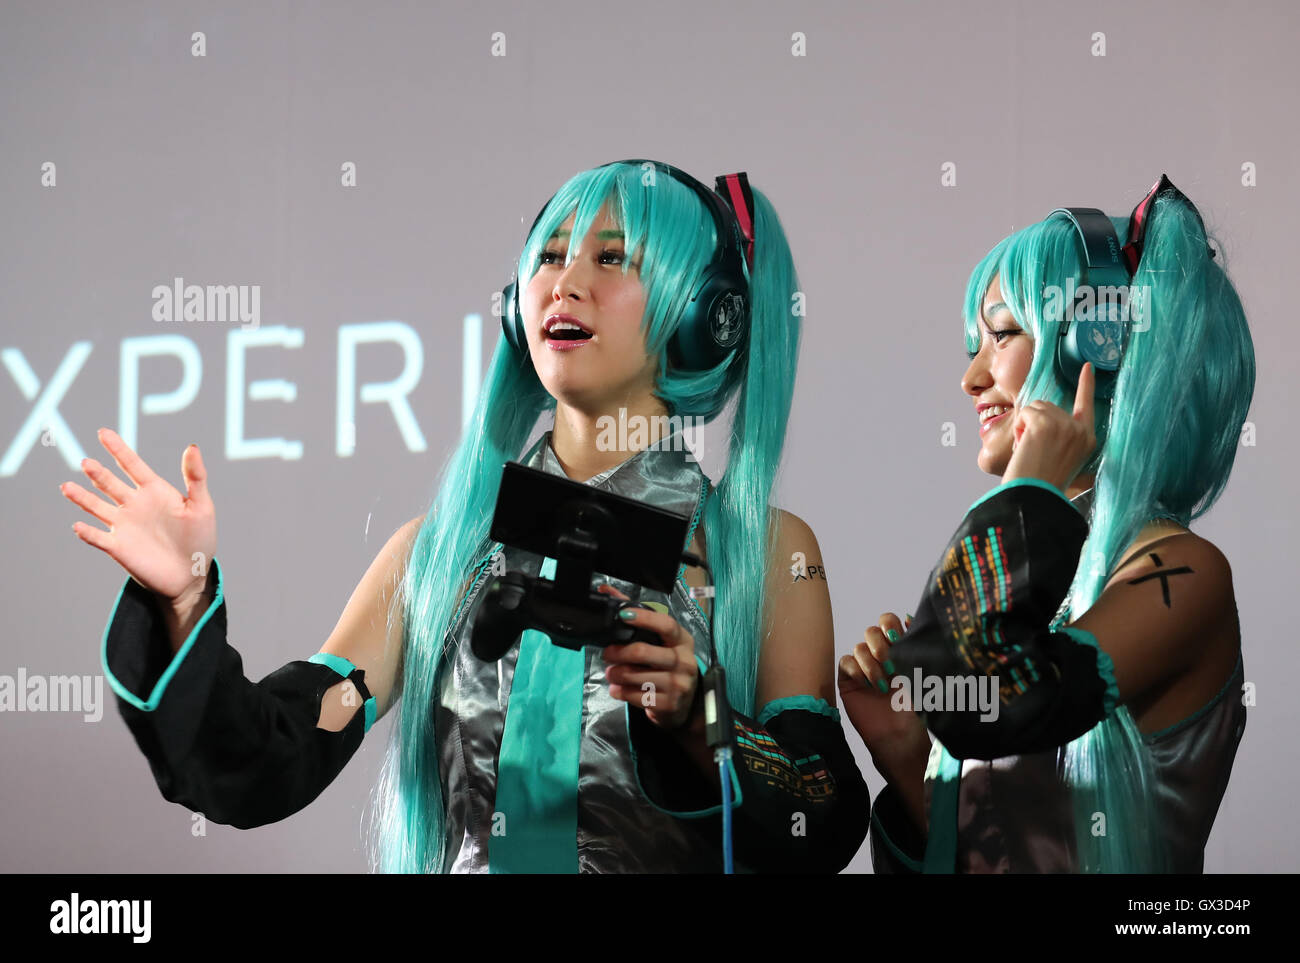 Thursday. 15th Sep, 2016. Models in costume of Hatsune Miku plays videogame with Sony's Xperia smartphone at the annual Tokyo Game Show in Chiba, suburban Tokyo on Thursday, September 15, 2016. The 20th anniversary Show includes show a new Virtual Reality (VR) area. The event hosts 614 exhibitors from 37 different countries and runs from September 15 to 18 at the International Convention Complex Makuhari Messe in Chiba. 1,523 game titles for smartphones, games consoles, PC and VR platforms are on show. Credit:  Yoshio Tsunoda/AFLO/Alamy Live News Stock Photo